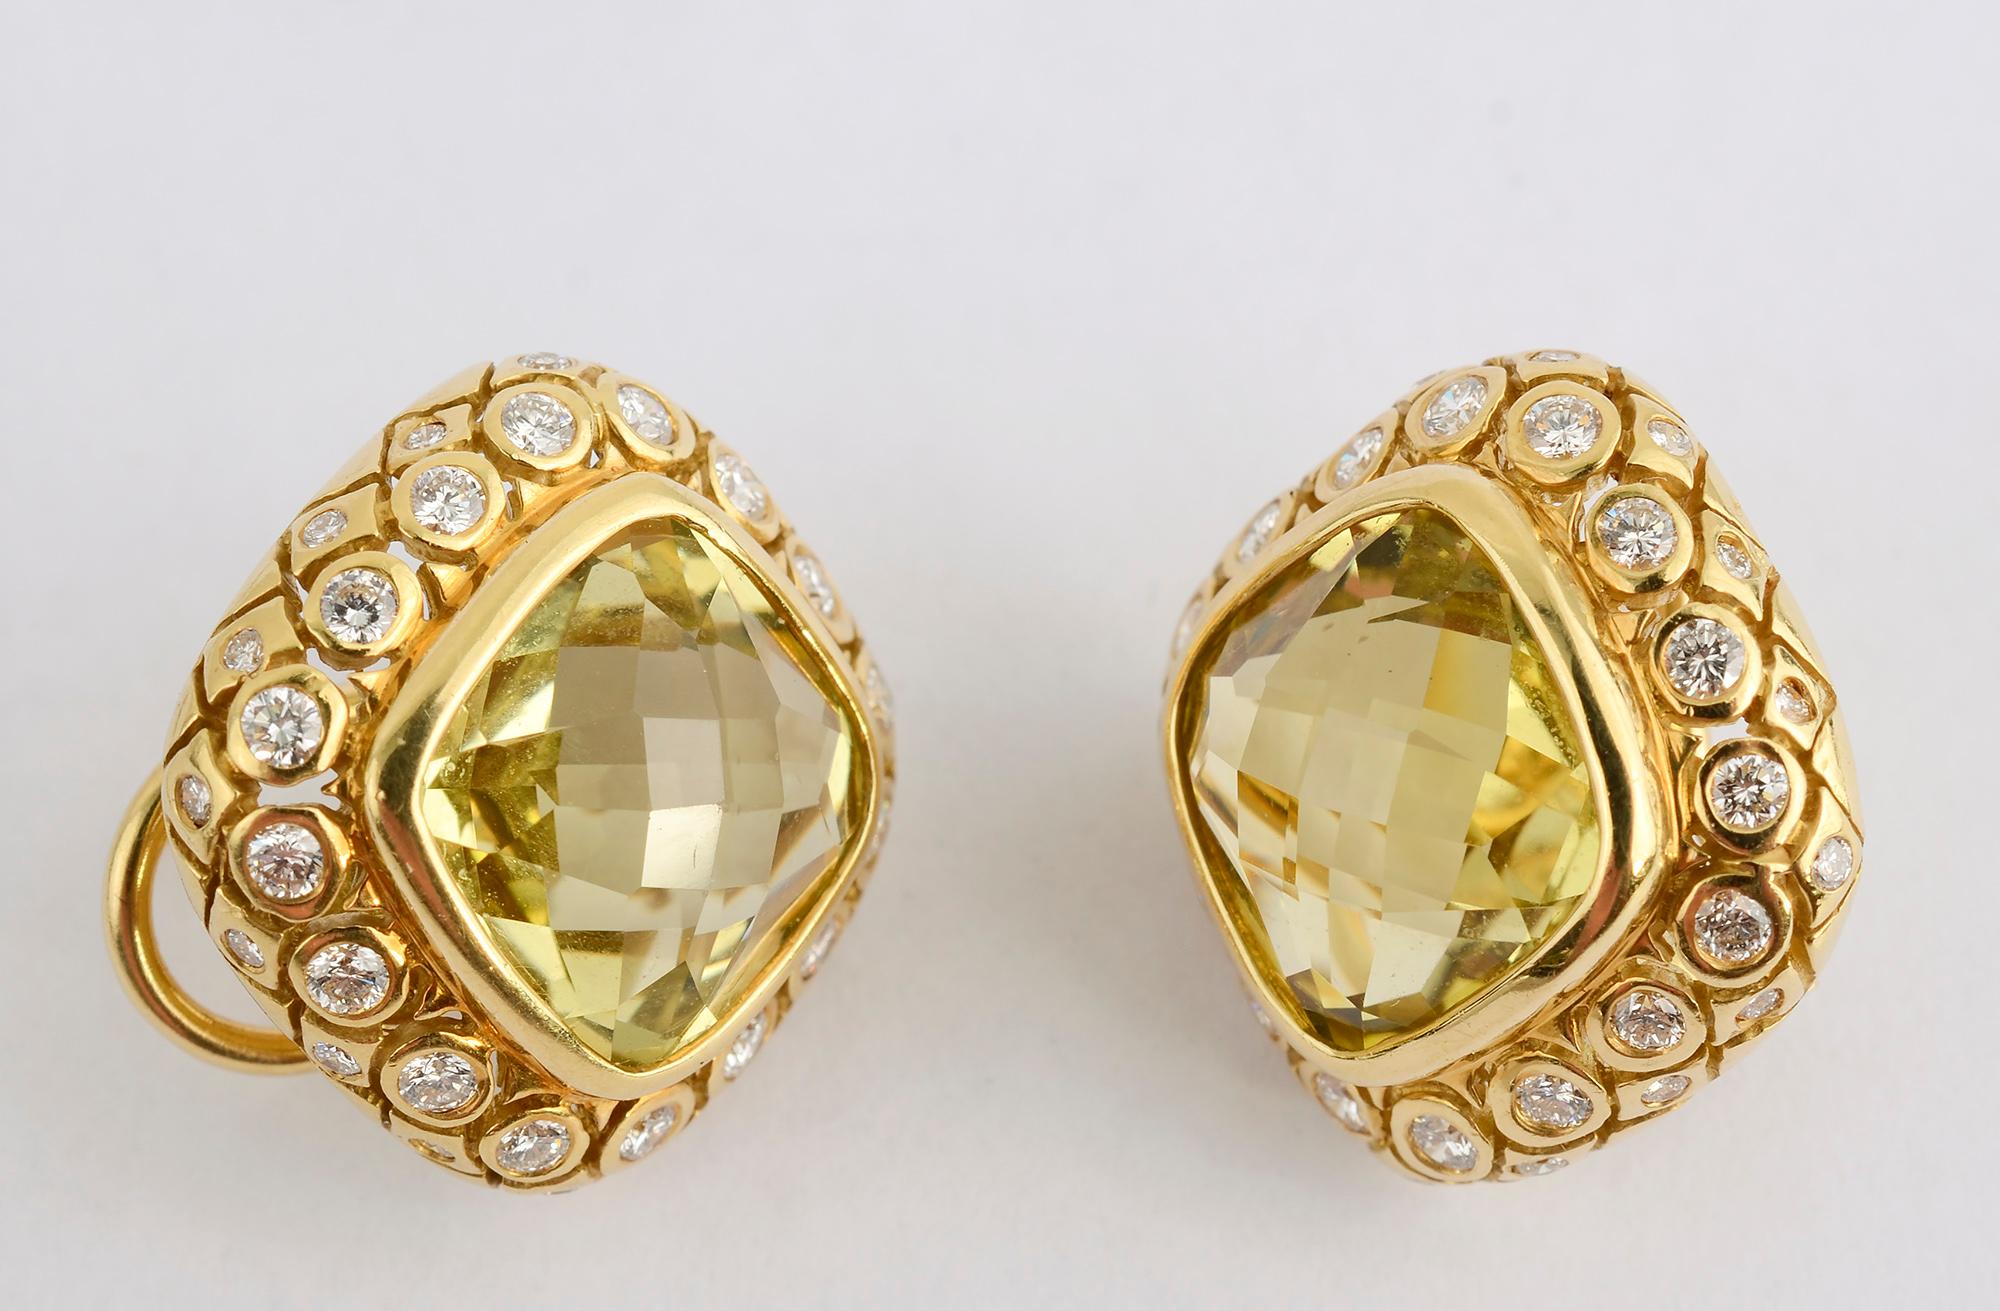 Seidengang earrings with a lemon/lime colored faceted quartz surrounded by diamonds. The two rows of diamonds in each earring weigh approximately 2.75 carats.
Backs are clips and posts. The earrings are 3/4 inch in length and width.